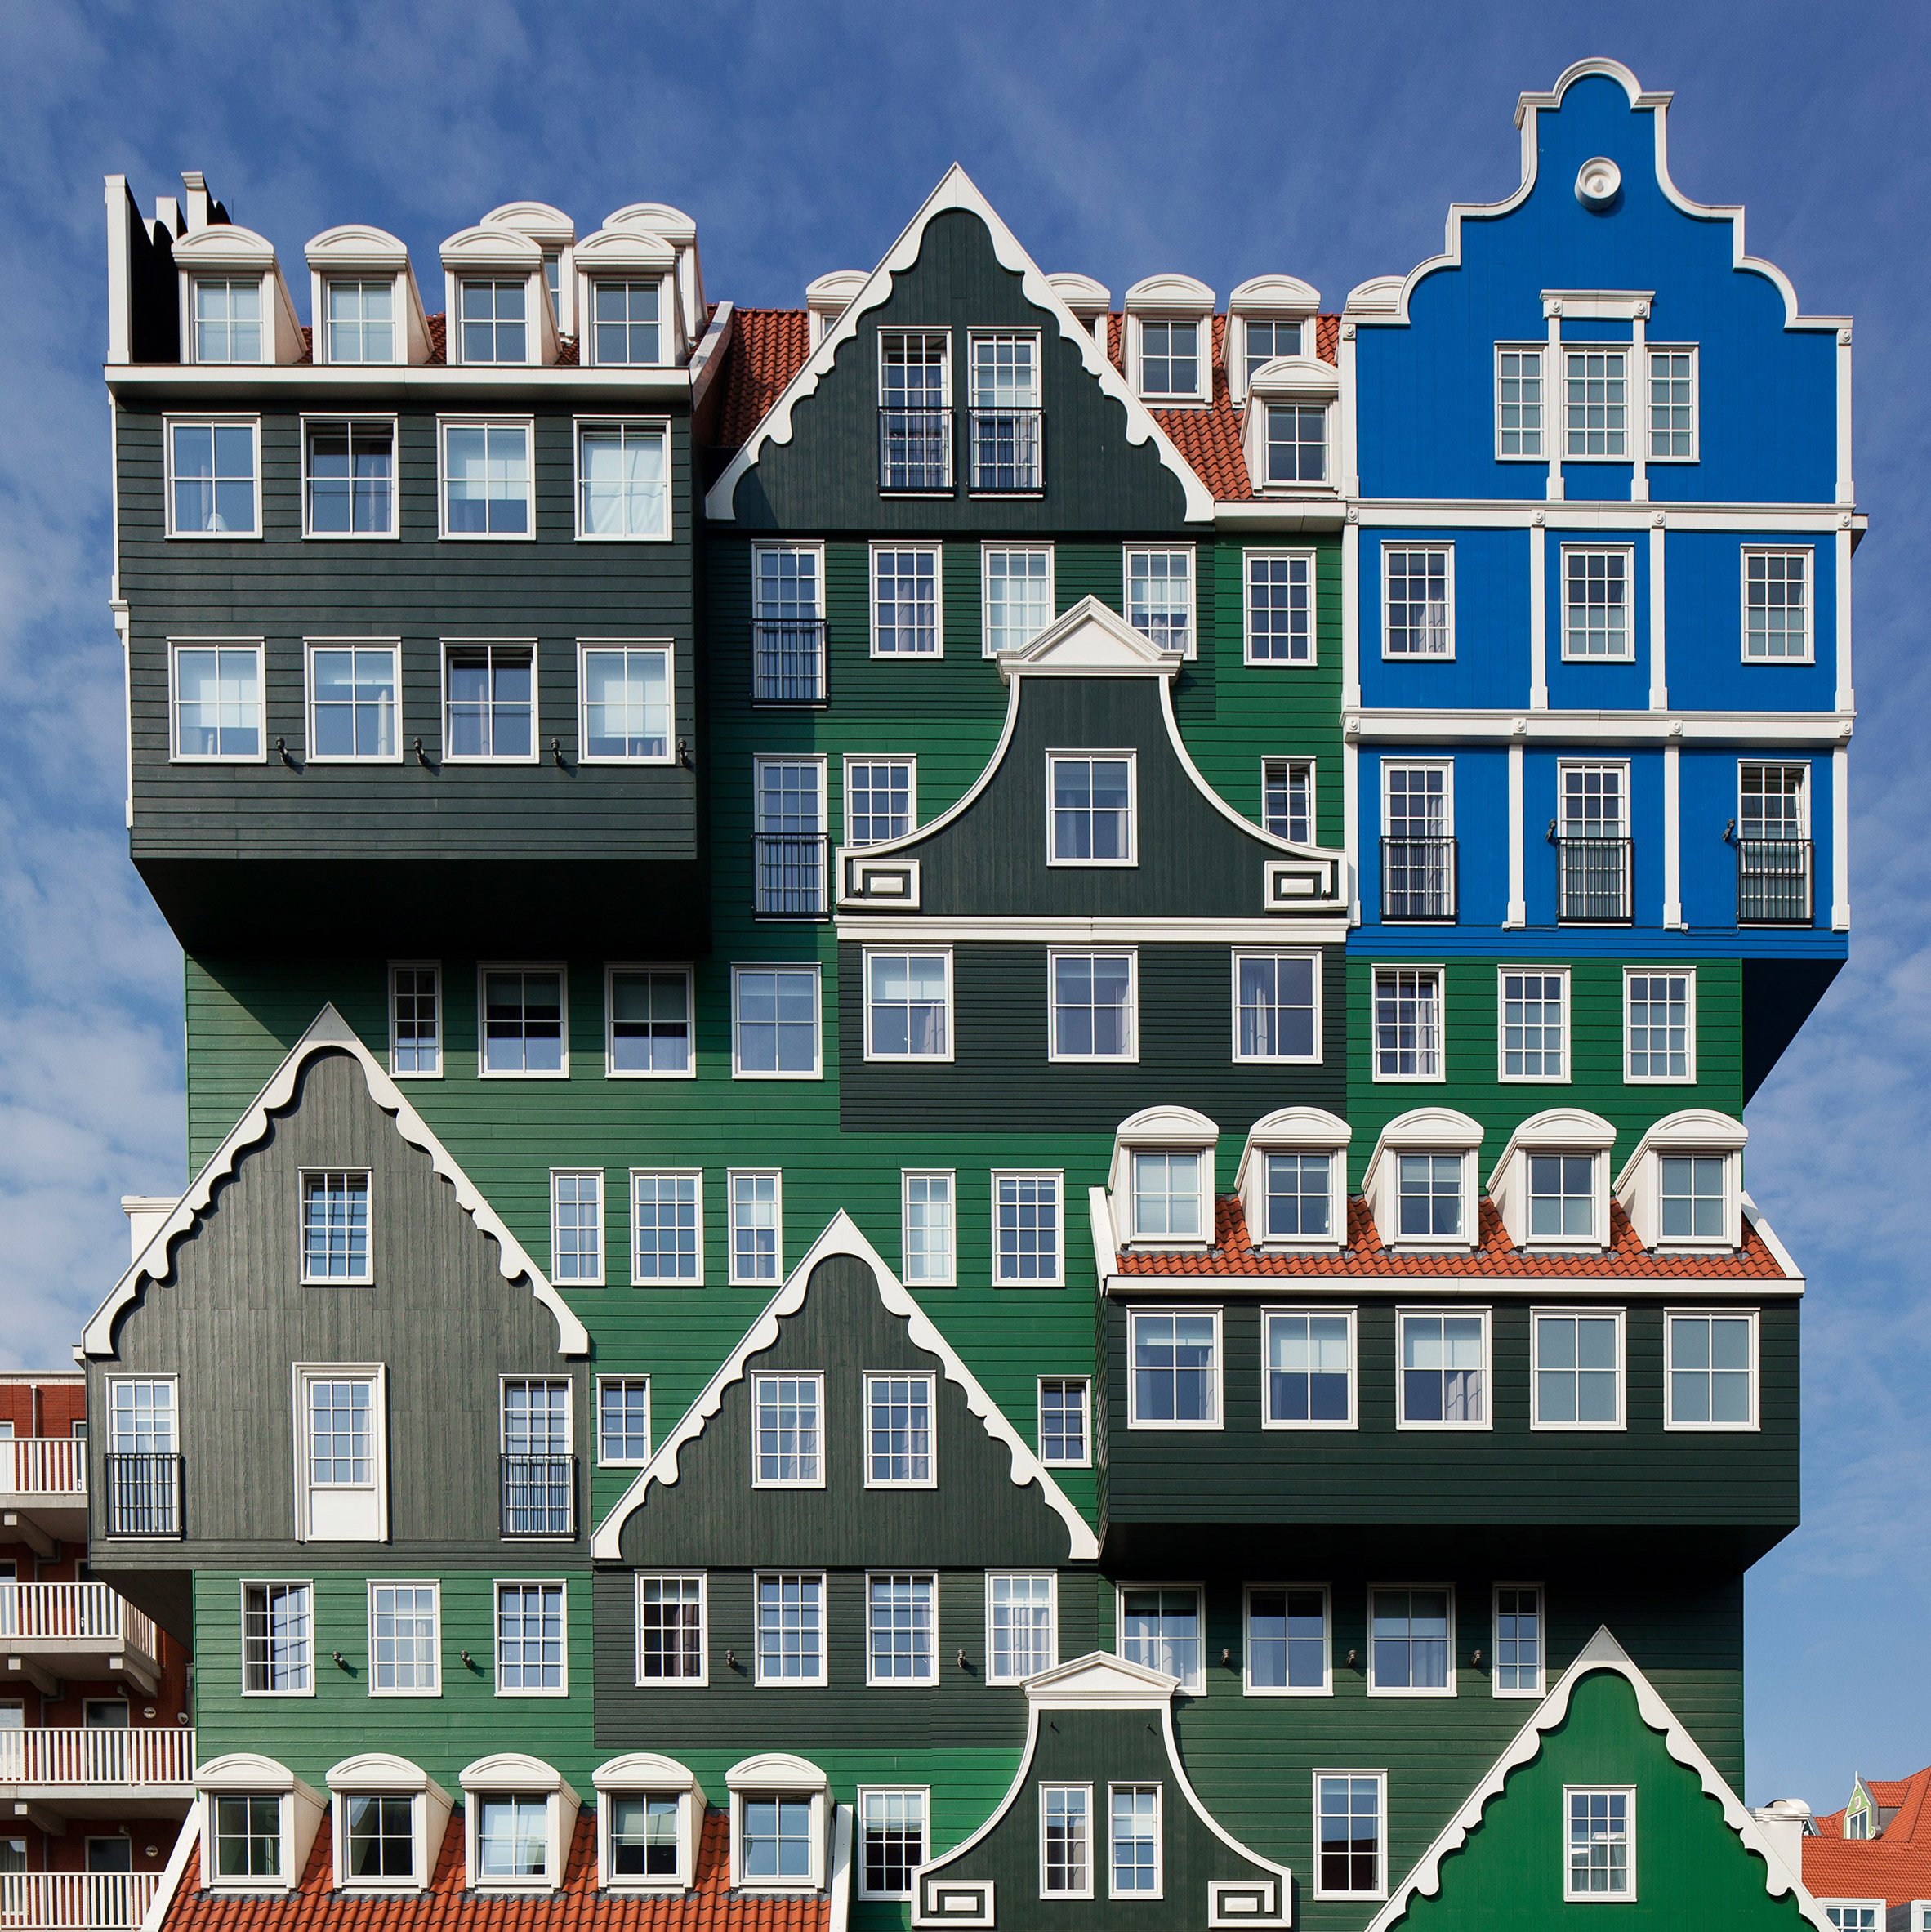 mix of different styles, on a building in blue, green and grey, with orange tiled roof details, and white decorative elements, postmodern architecture, gabled roofs and georgian windows